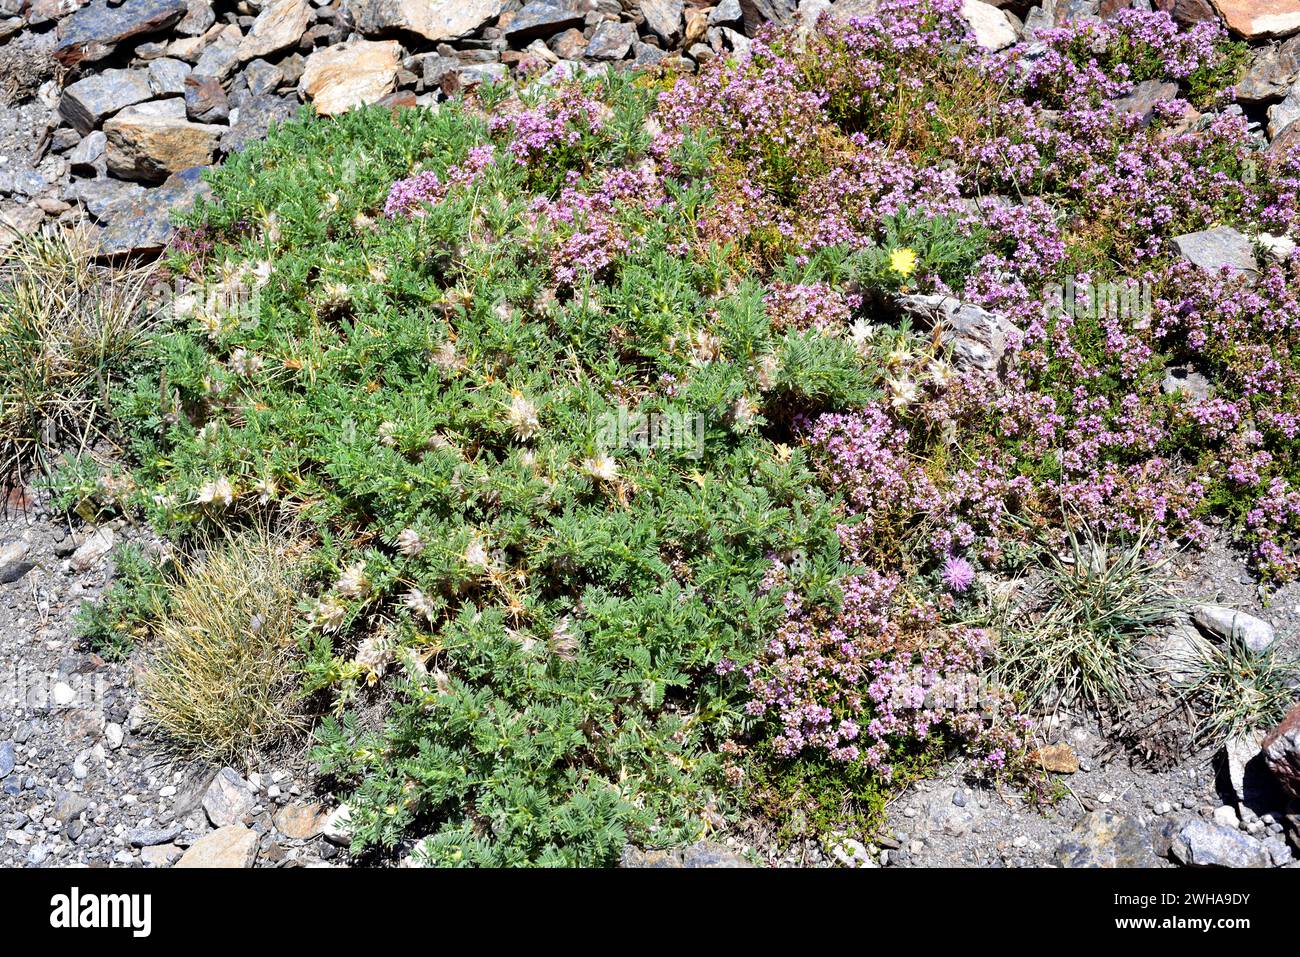 Astragalus granatensis or Astracantha granatensis is a cushion-shaped subshrub native to Spain mountains and Atlas (Morocco). At right Thymus serpyllo Stock Photo